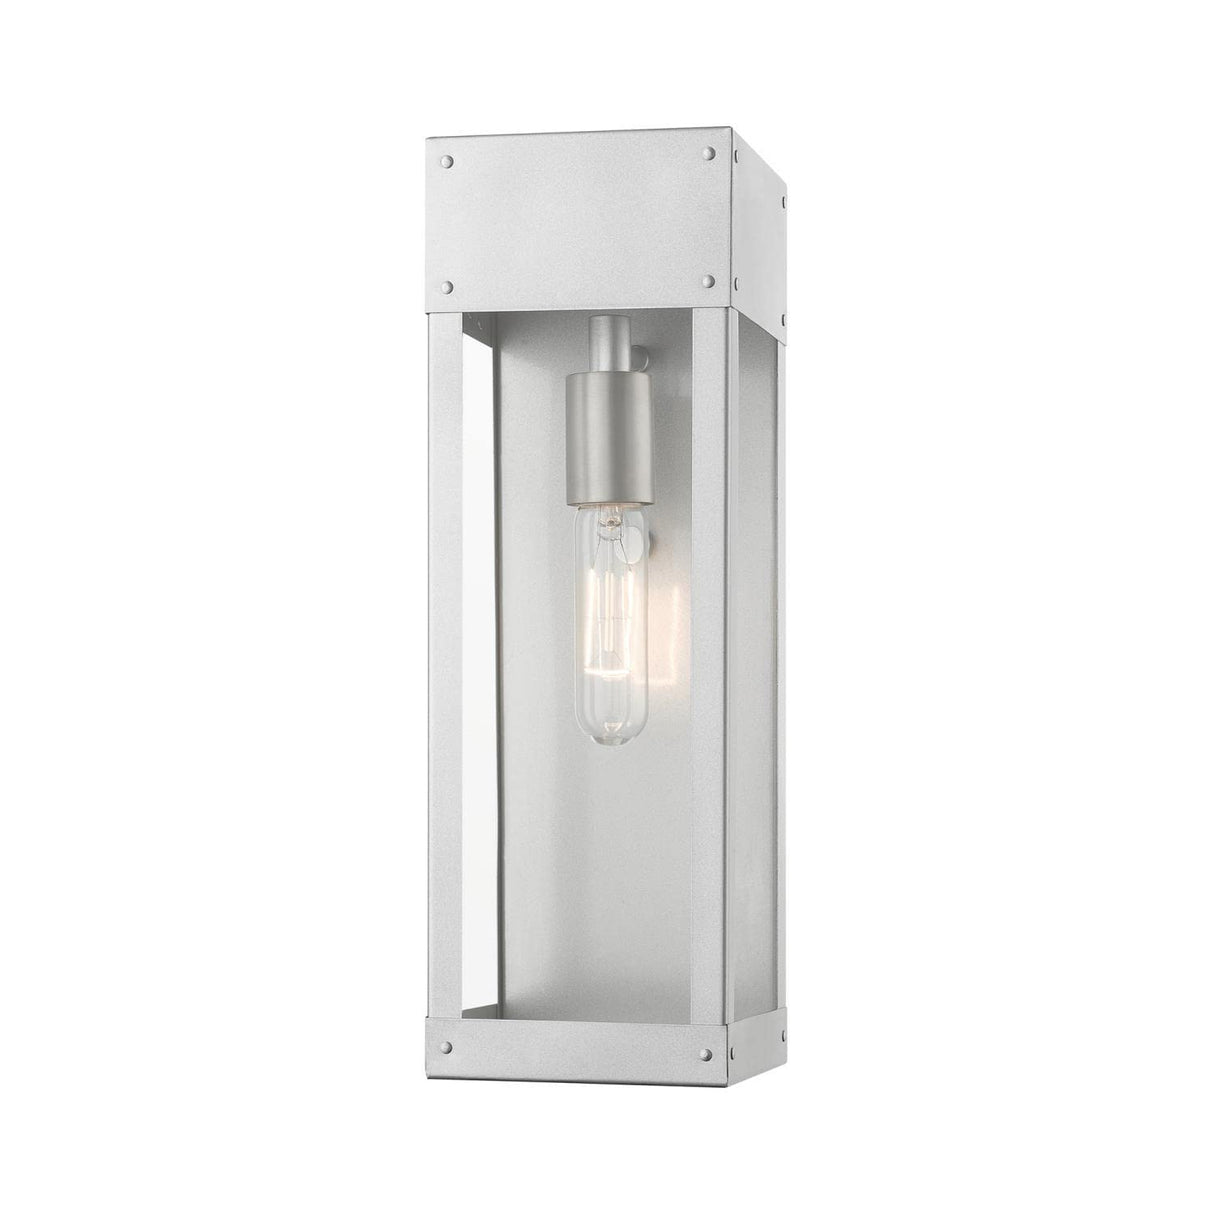 Barrett 1 Light Outdoor Sconce in Satin Nickel with Nickel Candle (20873-81)